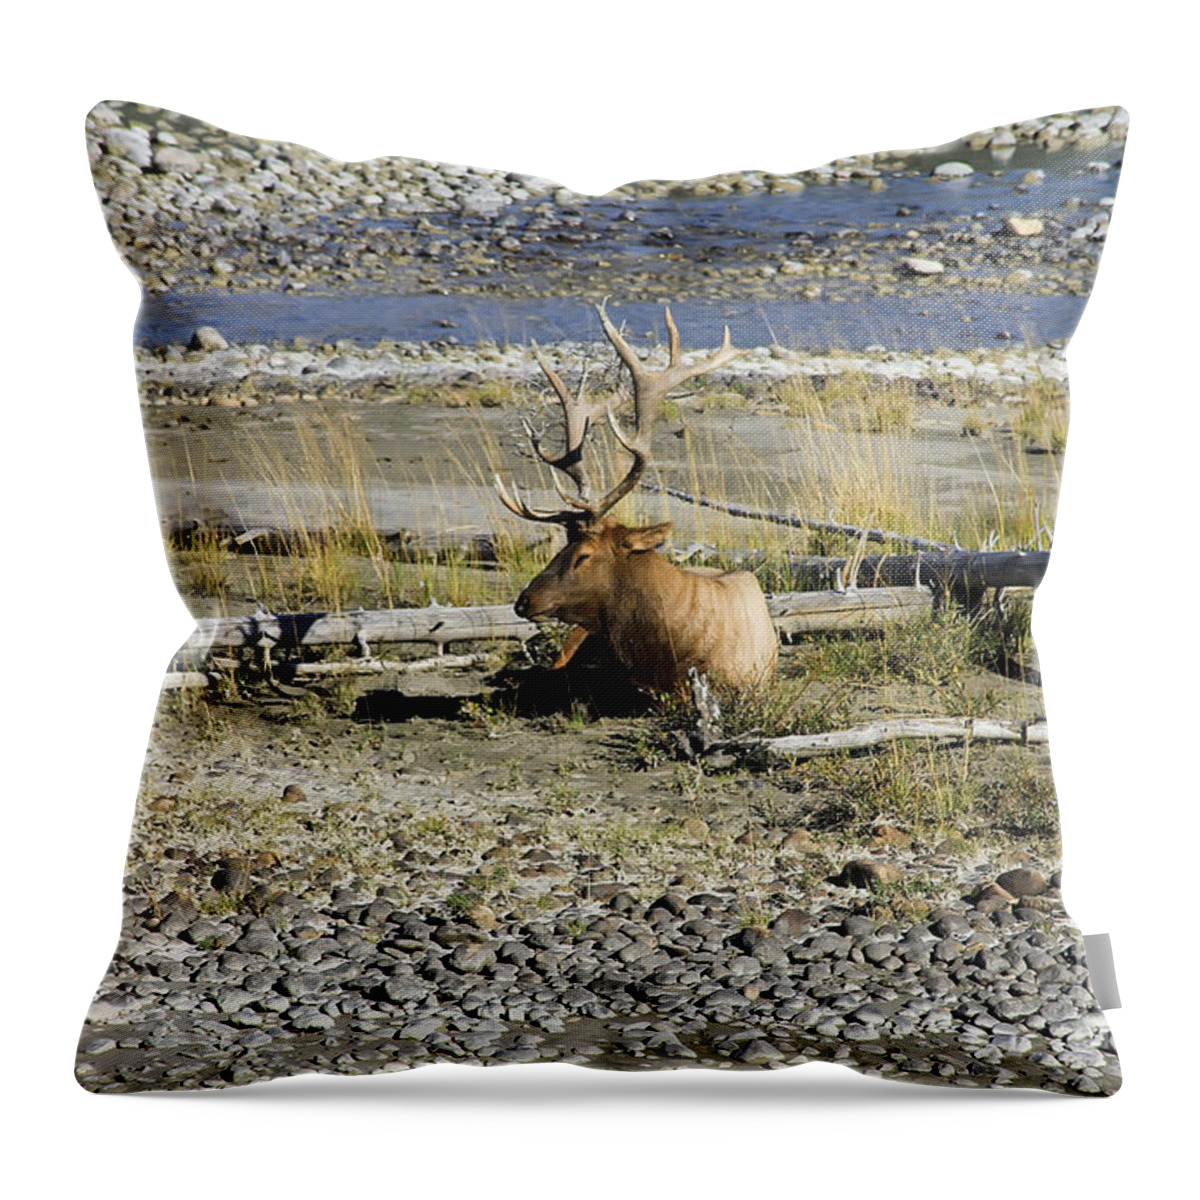 Animal Throw Pillow featuring the photograph Rocky Mountains Elk by Teresa Zieba